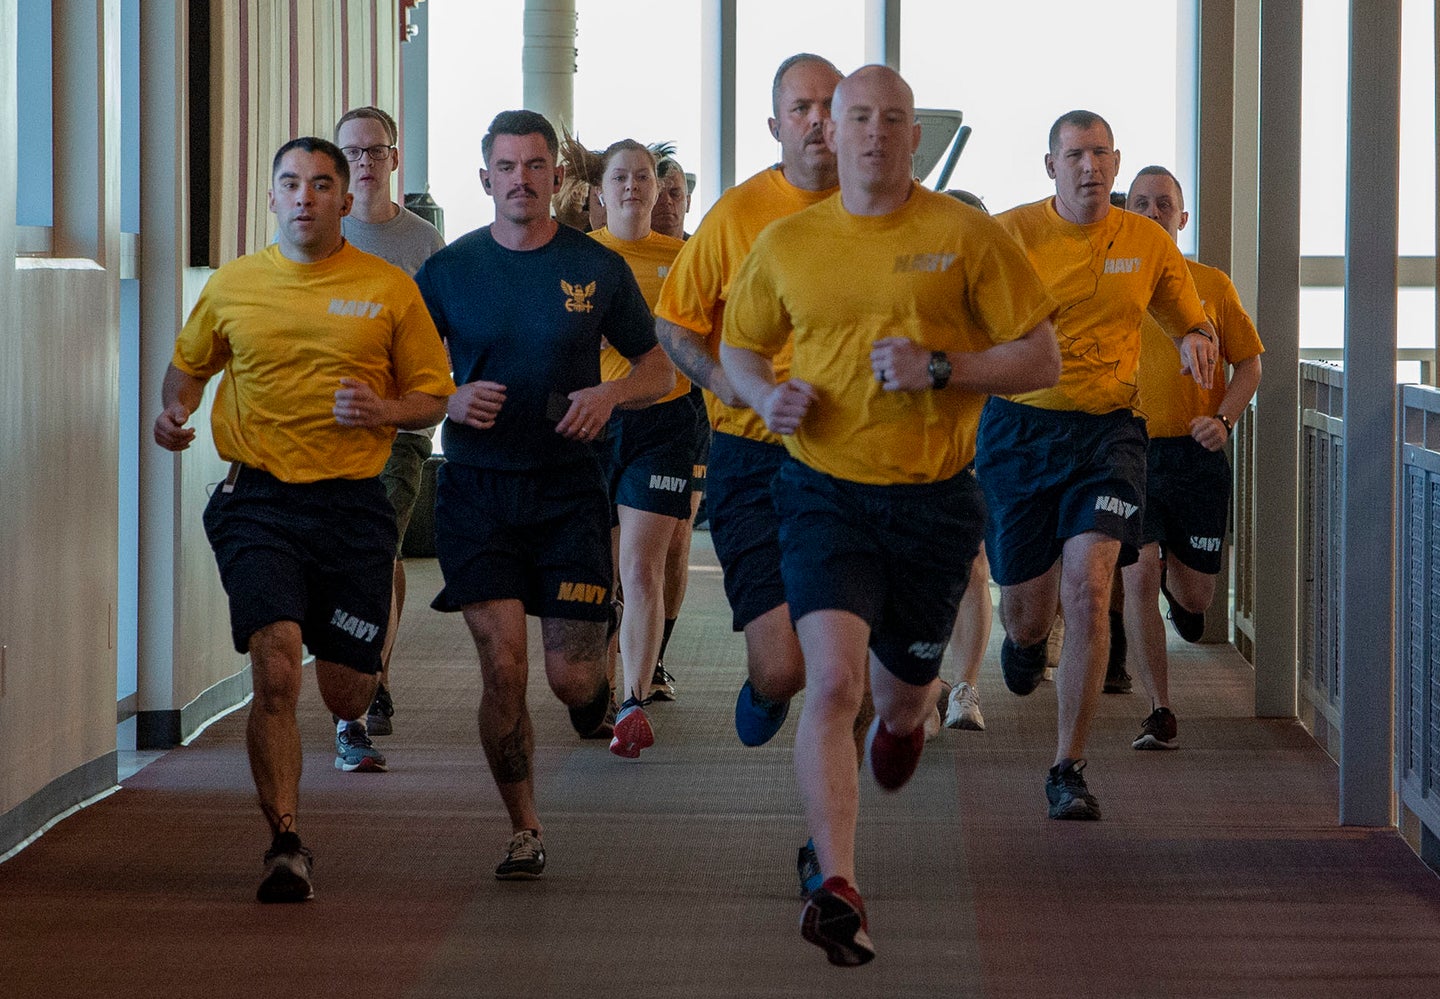 Navy gyms and fitness centers around the world may soon be open for use 24 hours a day under a new Navy policy. Navy photo by Mass Communication Specialist 1st Class Gilbert Bolibol.